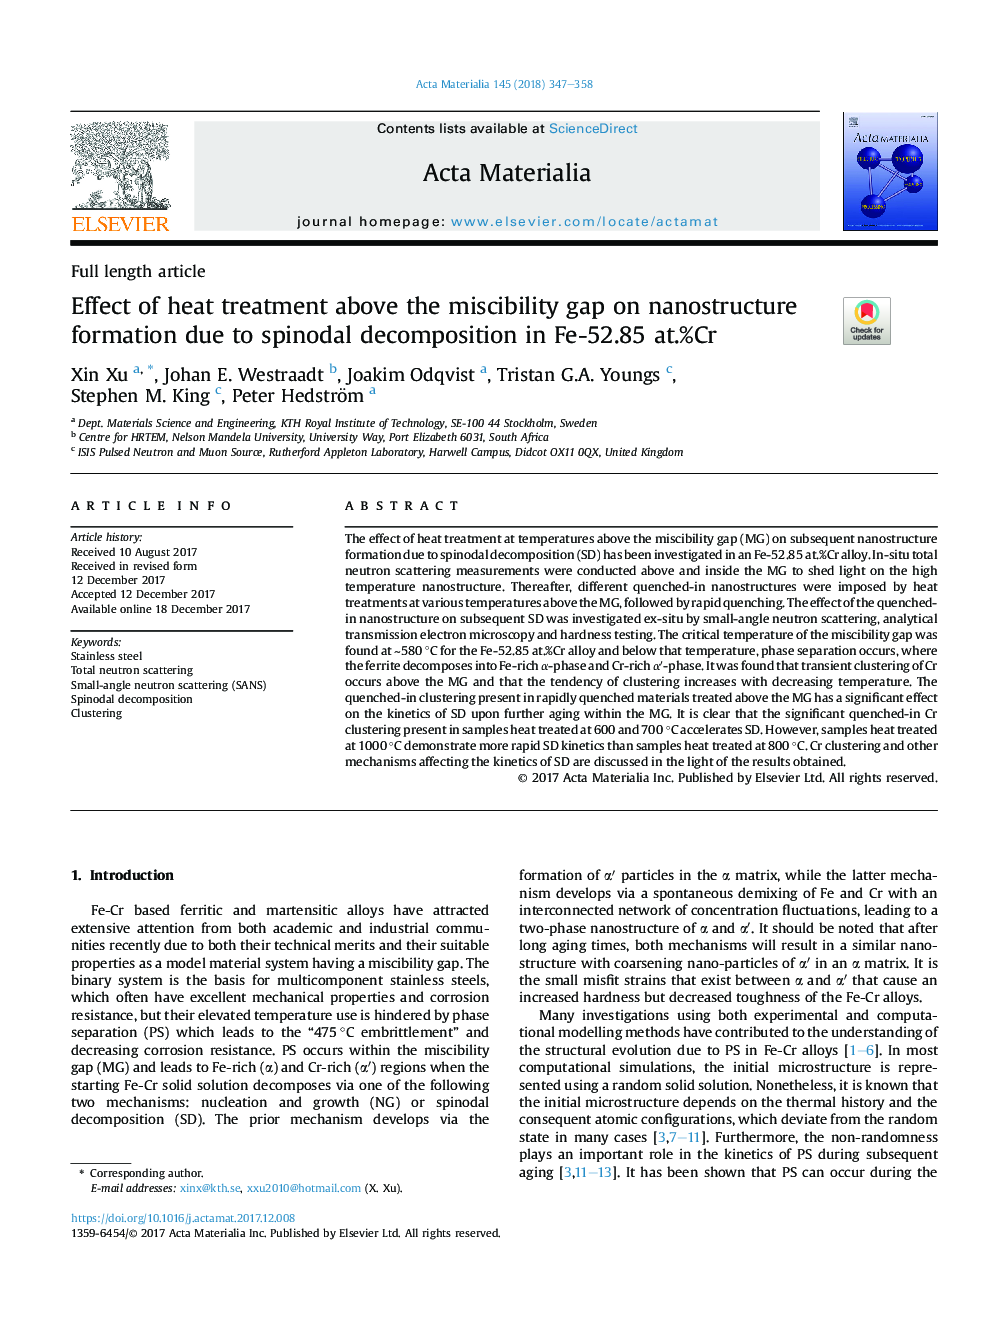 Effect of heat treatment above the miscibility gap on nanostructure formation due to spinodal decomposition in Fe-52.85 at.%Cr